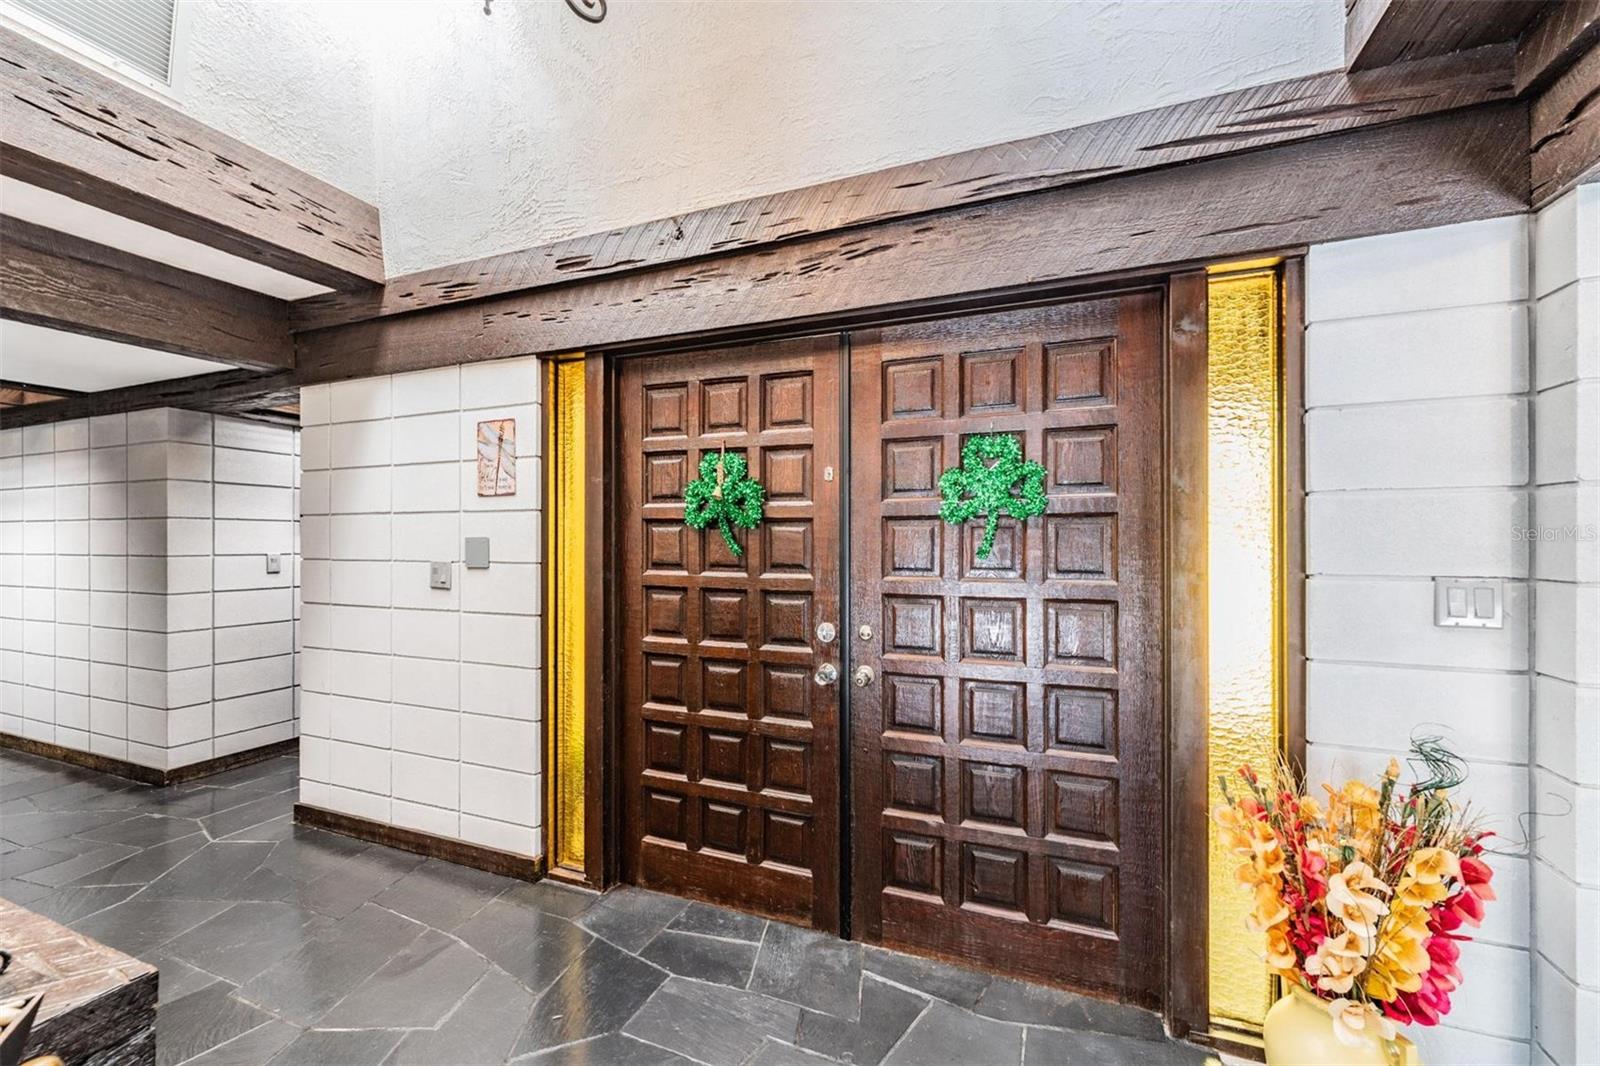 Inside view of Beautiful Double Entry Doors with Slate Flooring